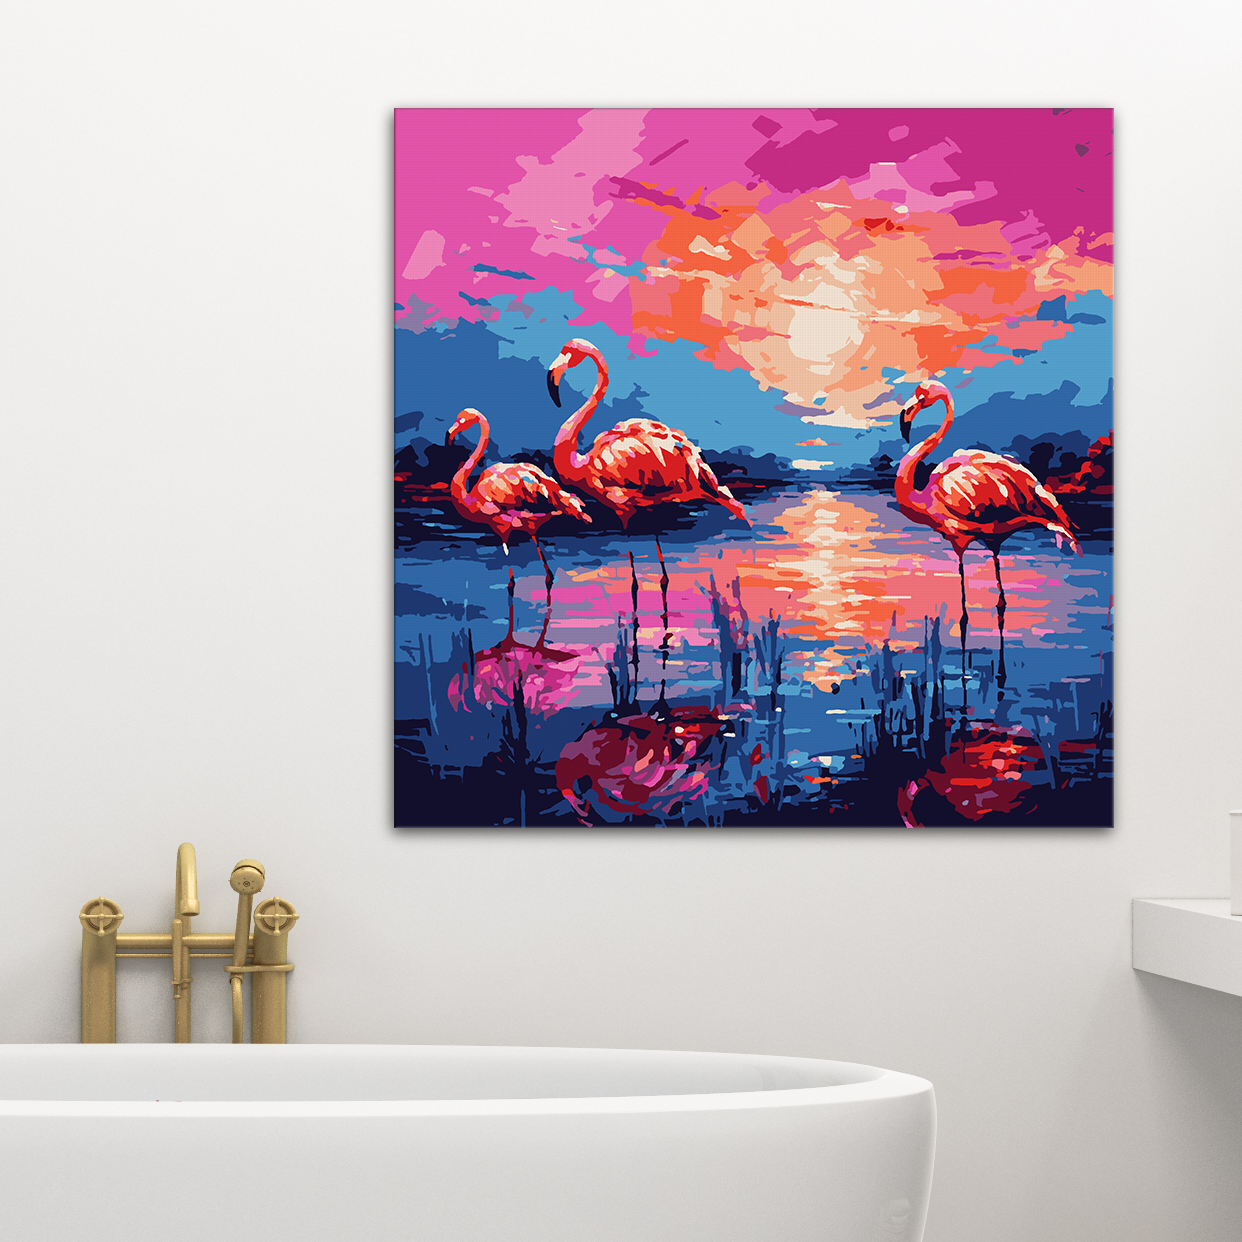 Flamingos at Sunset - Paint by Numbers Kit